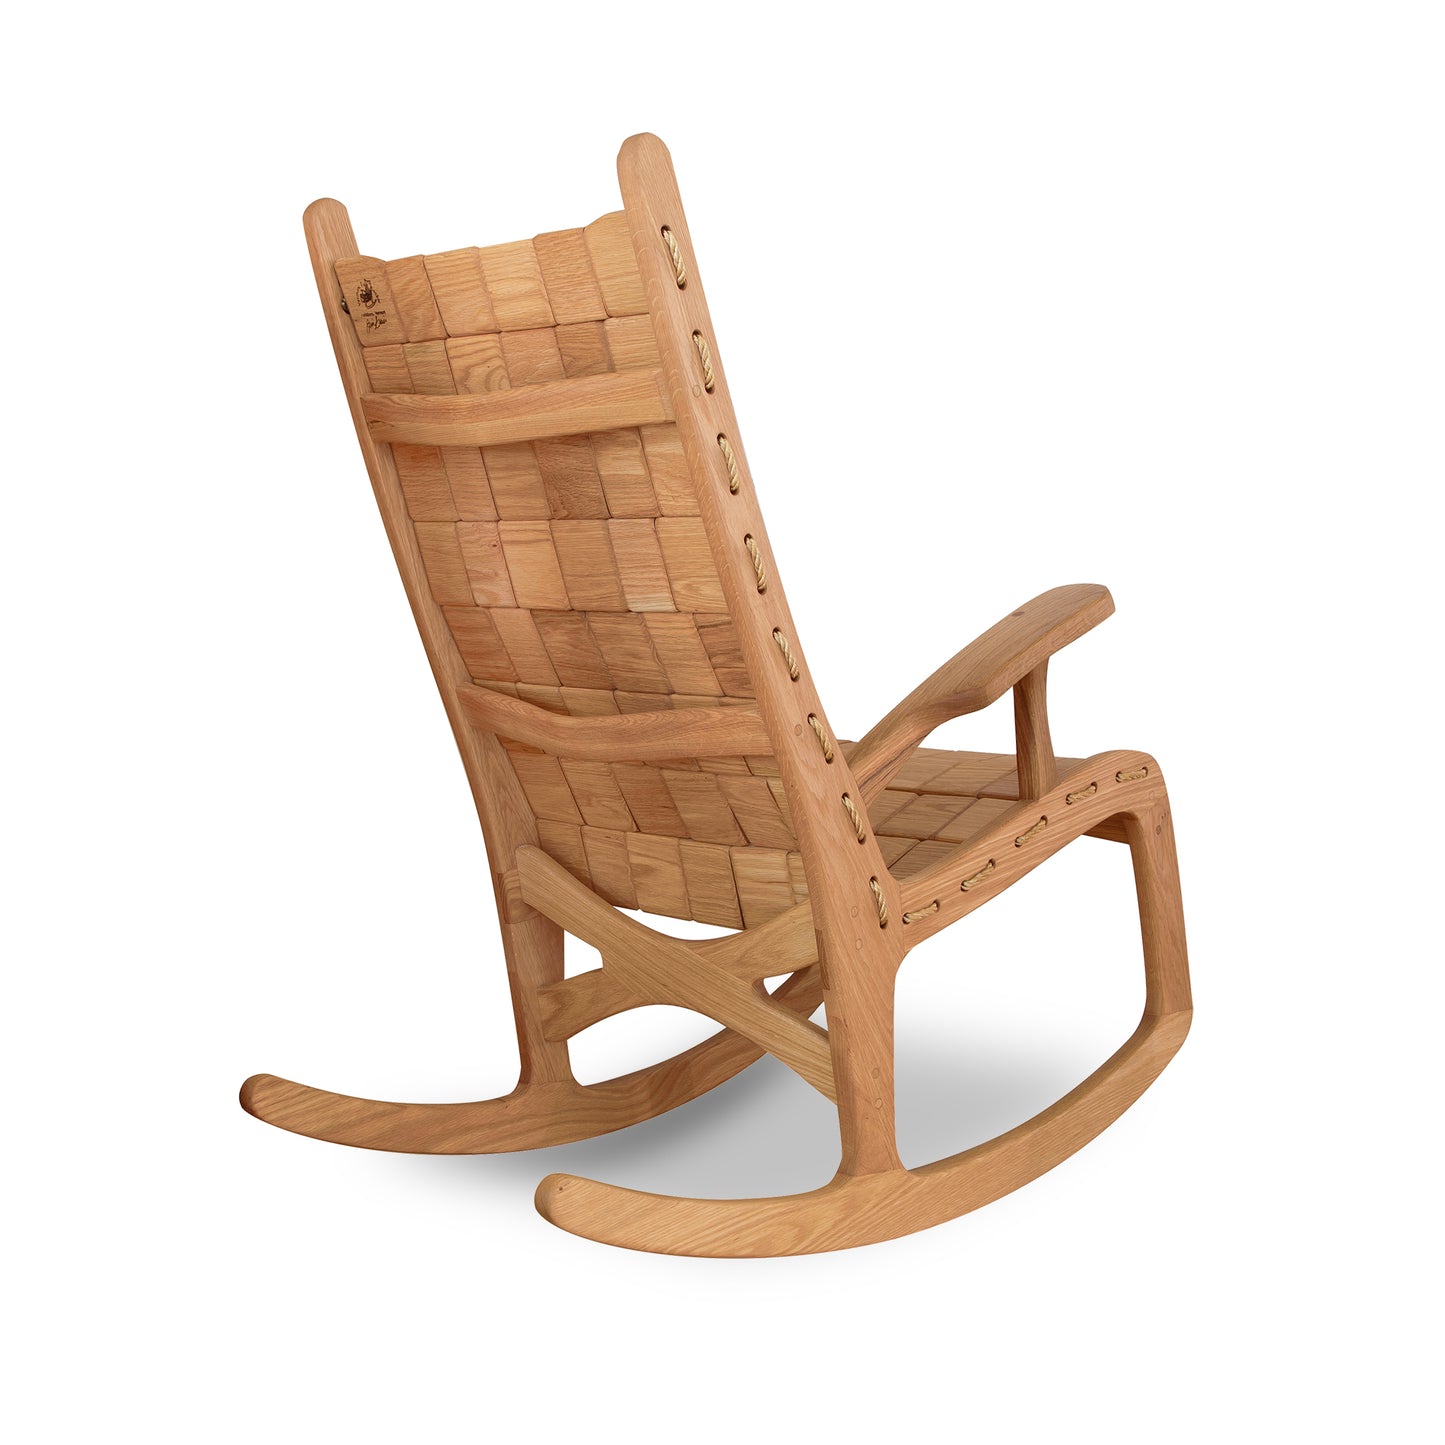 A custom Quilted Vermont Oak Rocking Chair by Vermont Folk Rocker with a vertical slat back and flat armrests, photographed on a white background. The chair is crafted from solid oak wood with a smooth finish.